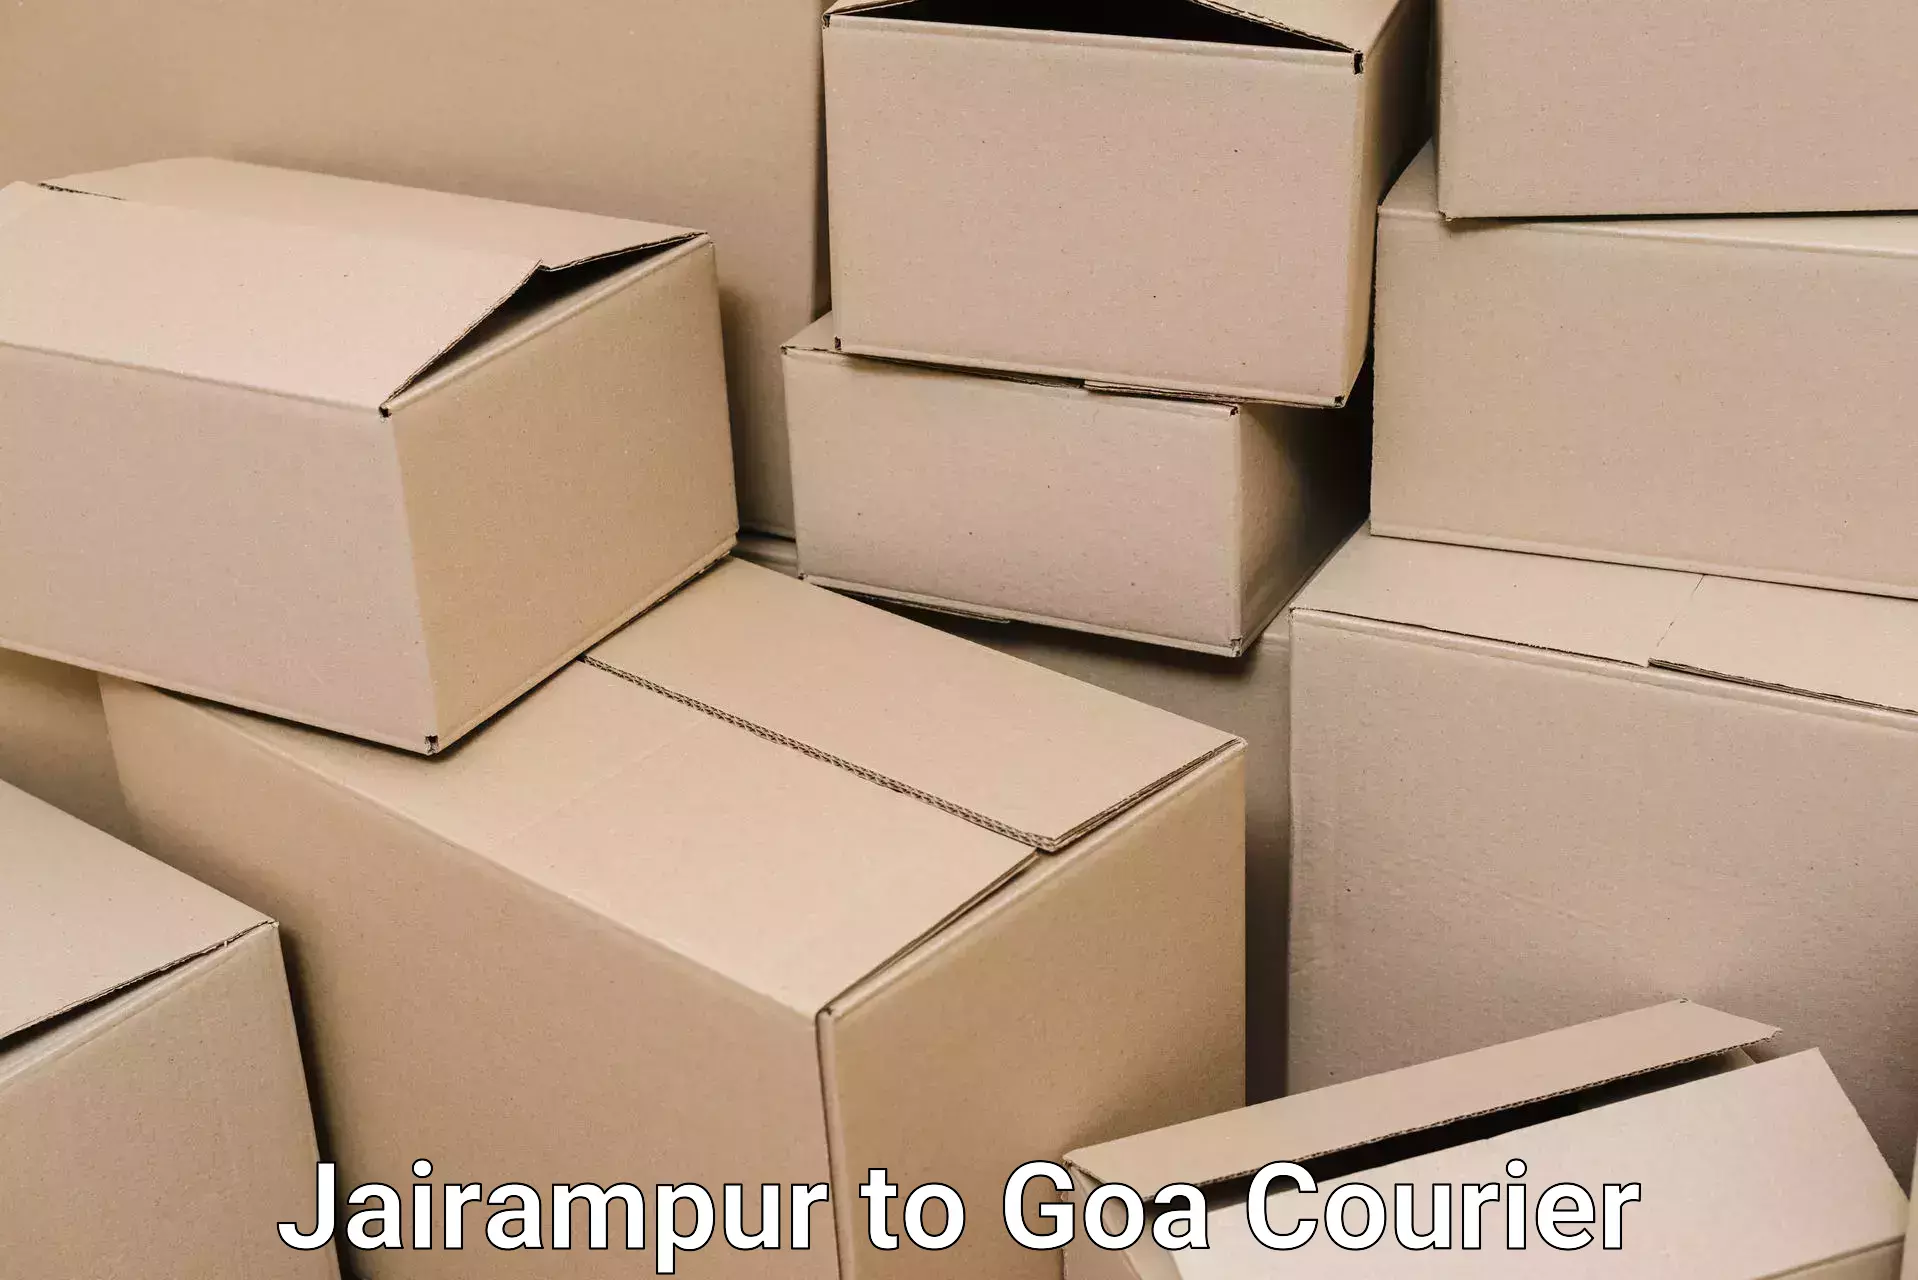 Dependable moving services Jairampur to Bardez